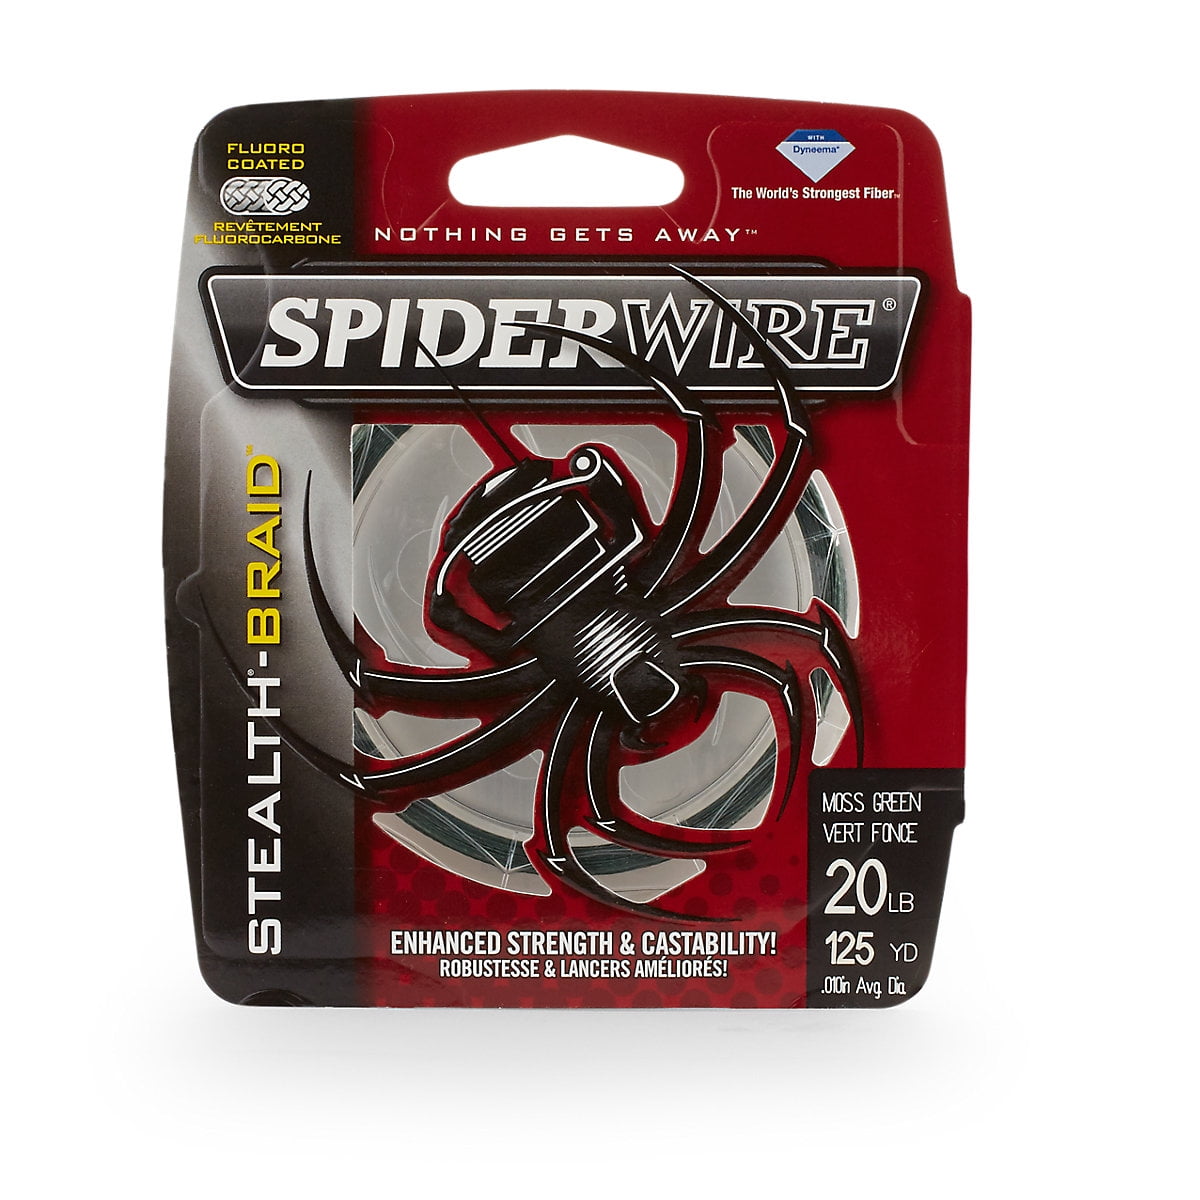 SpiderWire Stealth Smooth Superline Braid Fishing Line, Spiderwire® Stealth  Smooth, SCSM10G-200 SPW STSMO 10LB 200YD MGRN, Moss Green, 10/4 Pound  Test-200 Yard : : Sports, Fitness & Outdoors